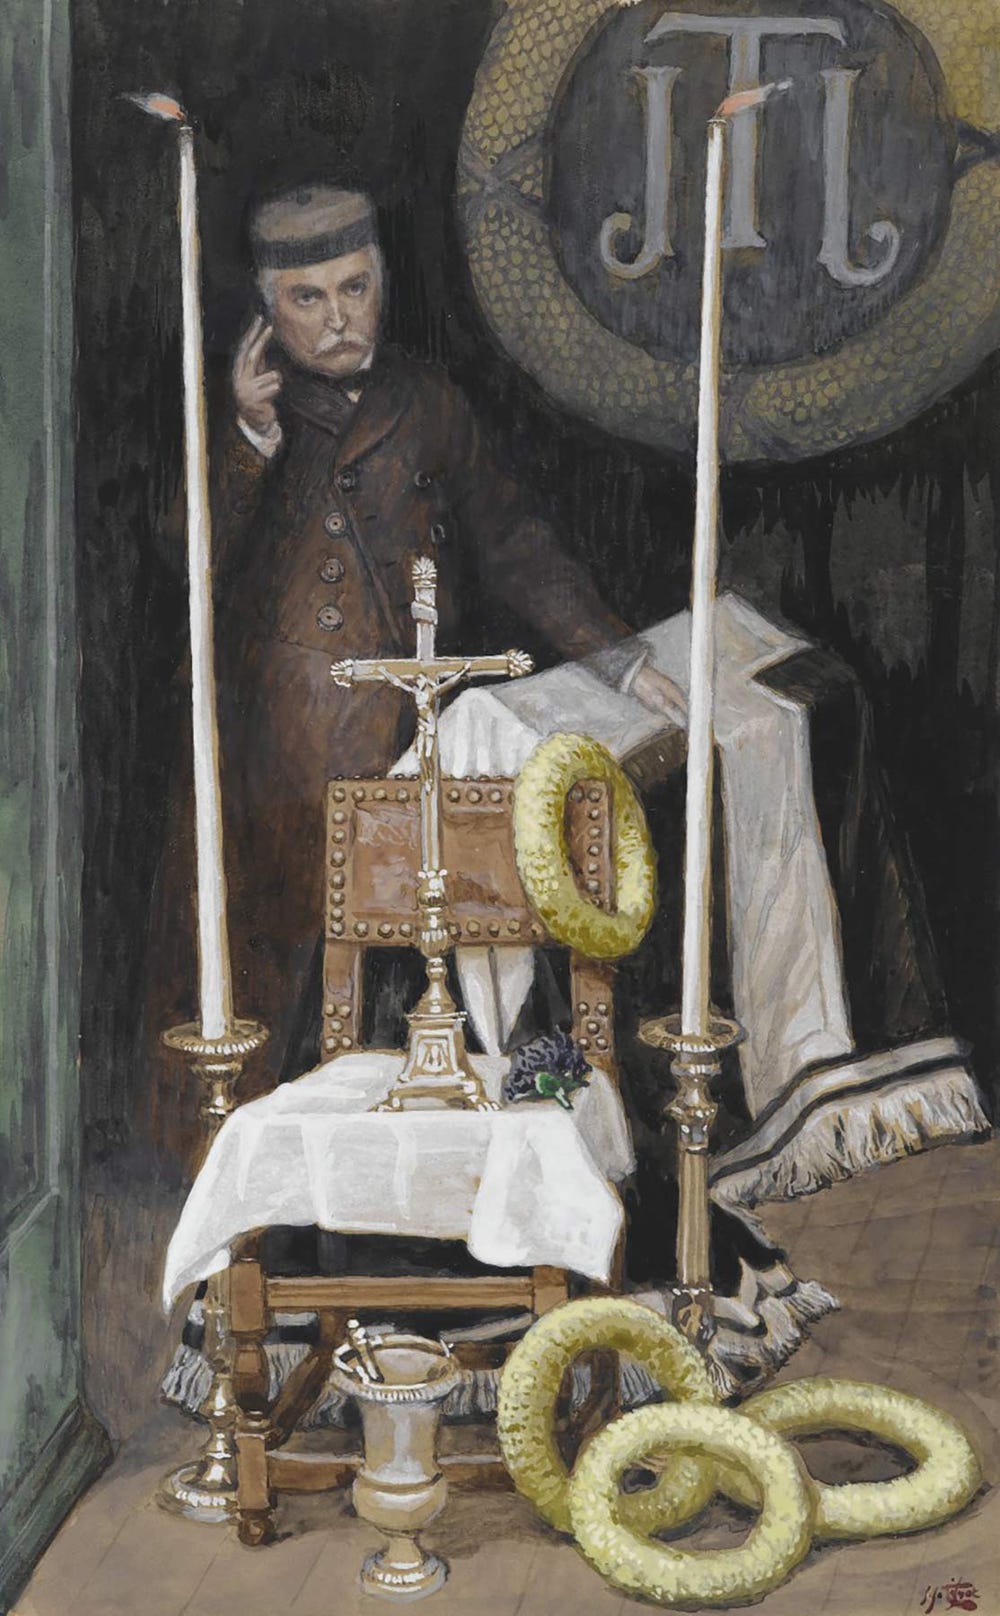 Man behind a table with Jesus on the cross in between two large candlesticks